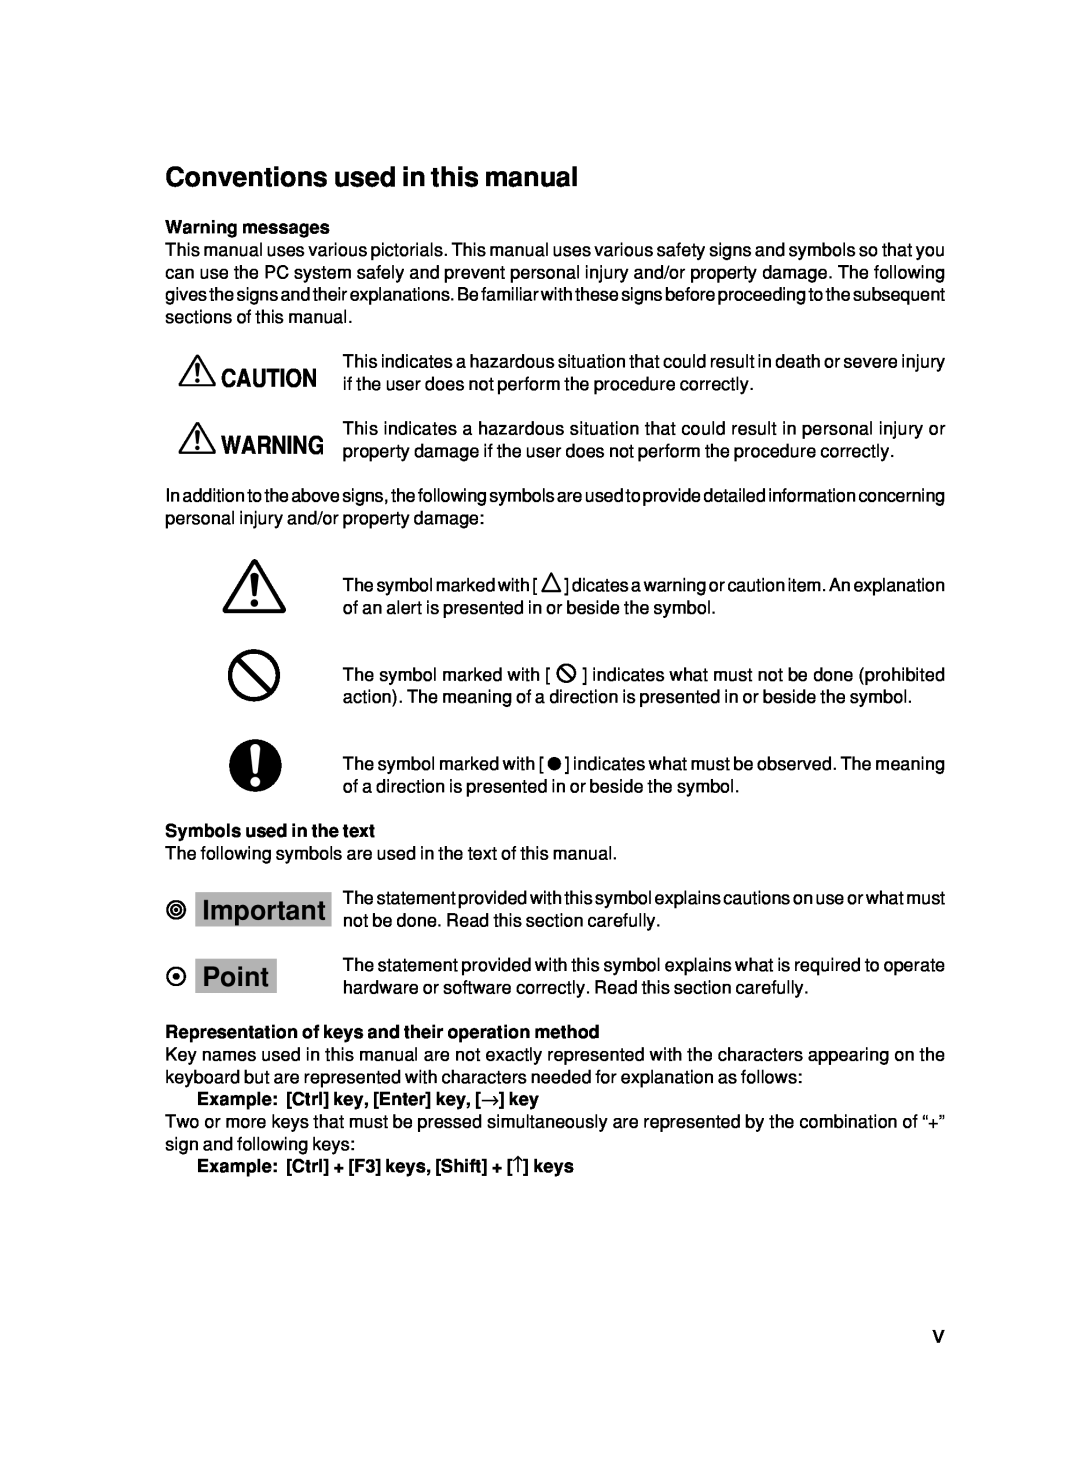 Fujitsu 500 user manual Conventions used in this manual, Point, Warning messages, Symbols used in the text 